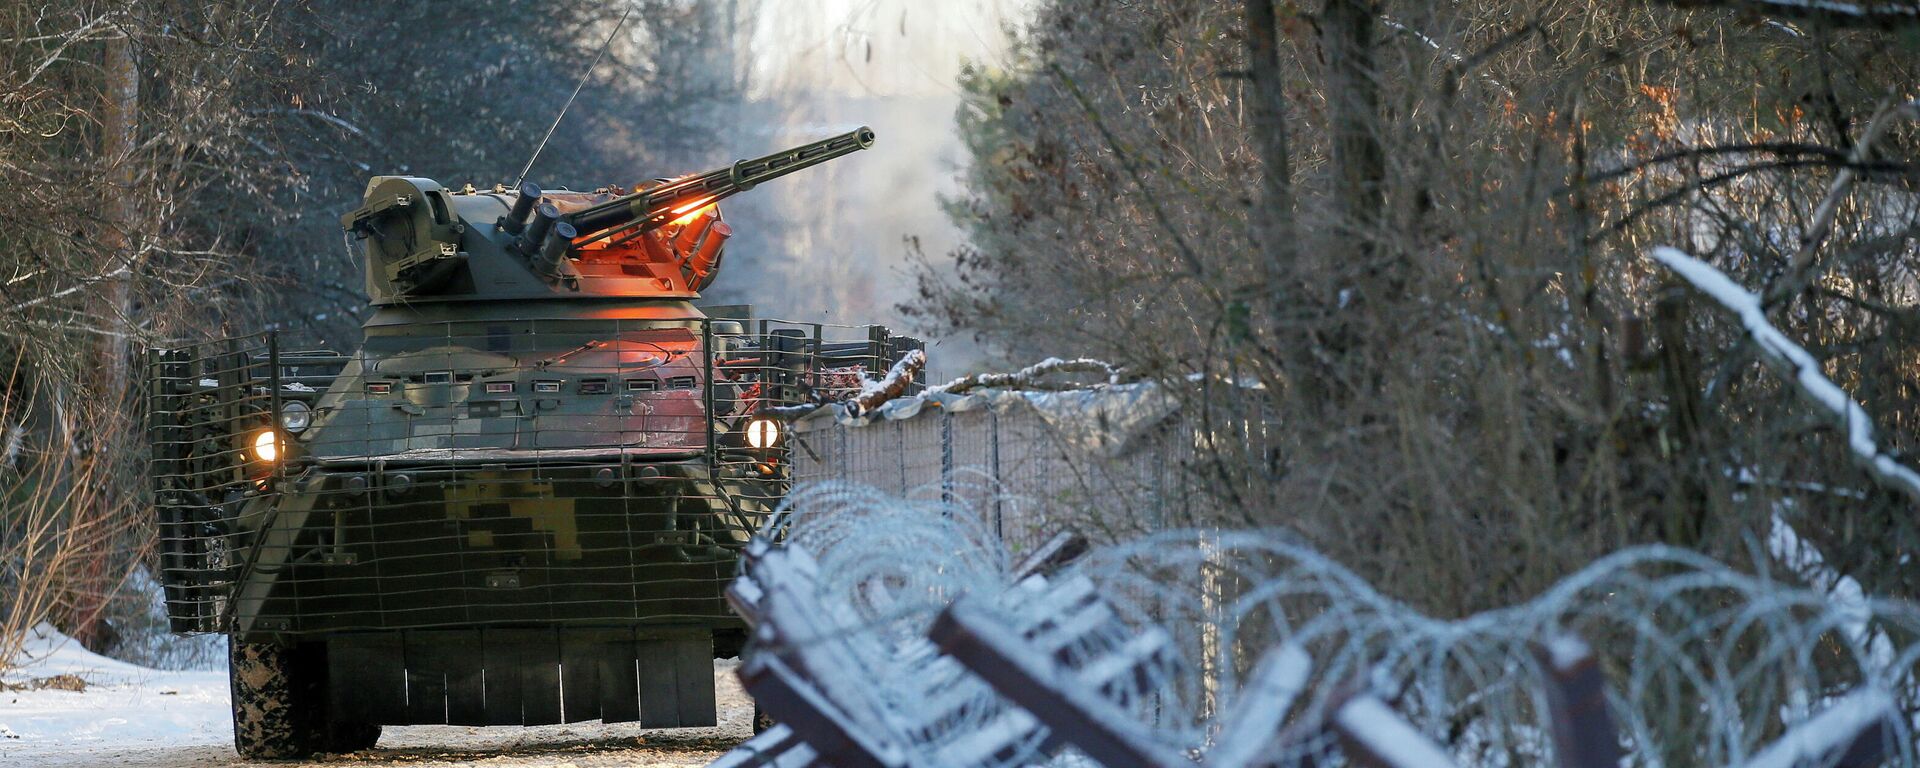 An armoured personnel carrier is seen during tactical exercises, which are conducted by the Ukrainian National Guard, Armed Forces, special operations units and simulate a crisis situation in an urban settlement, in the abandoned city of Pripyat near the Chernobyl Nuclear Power Plant, Ukraine February 4, 2022. - Sputnik International, 1920, 13.02.2022